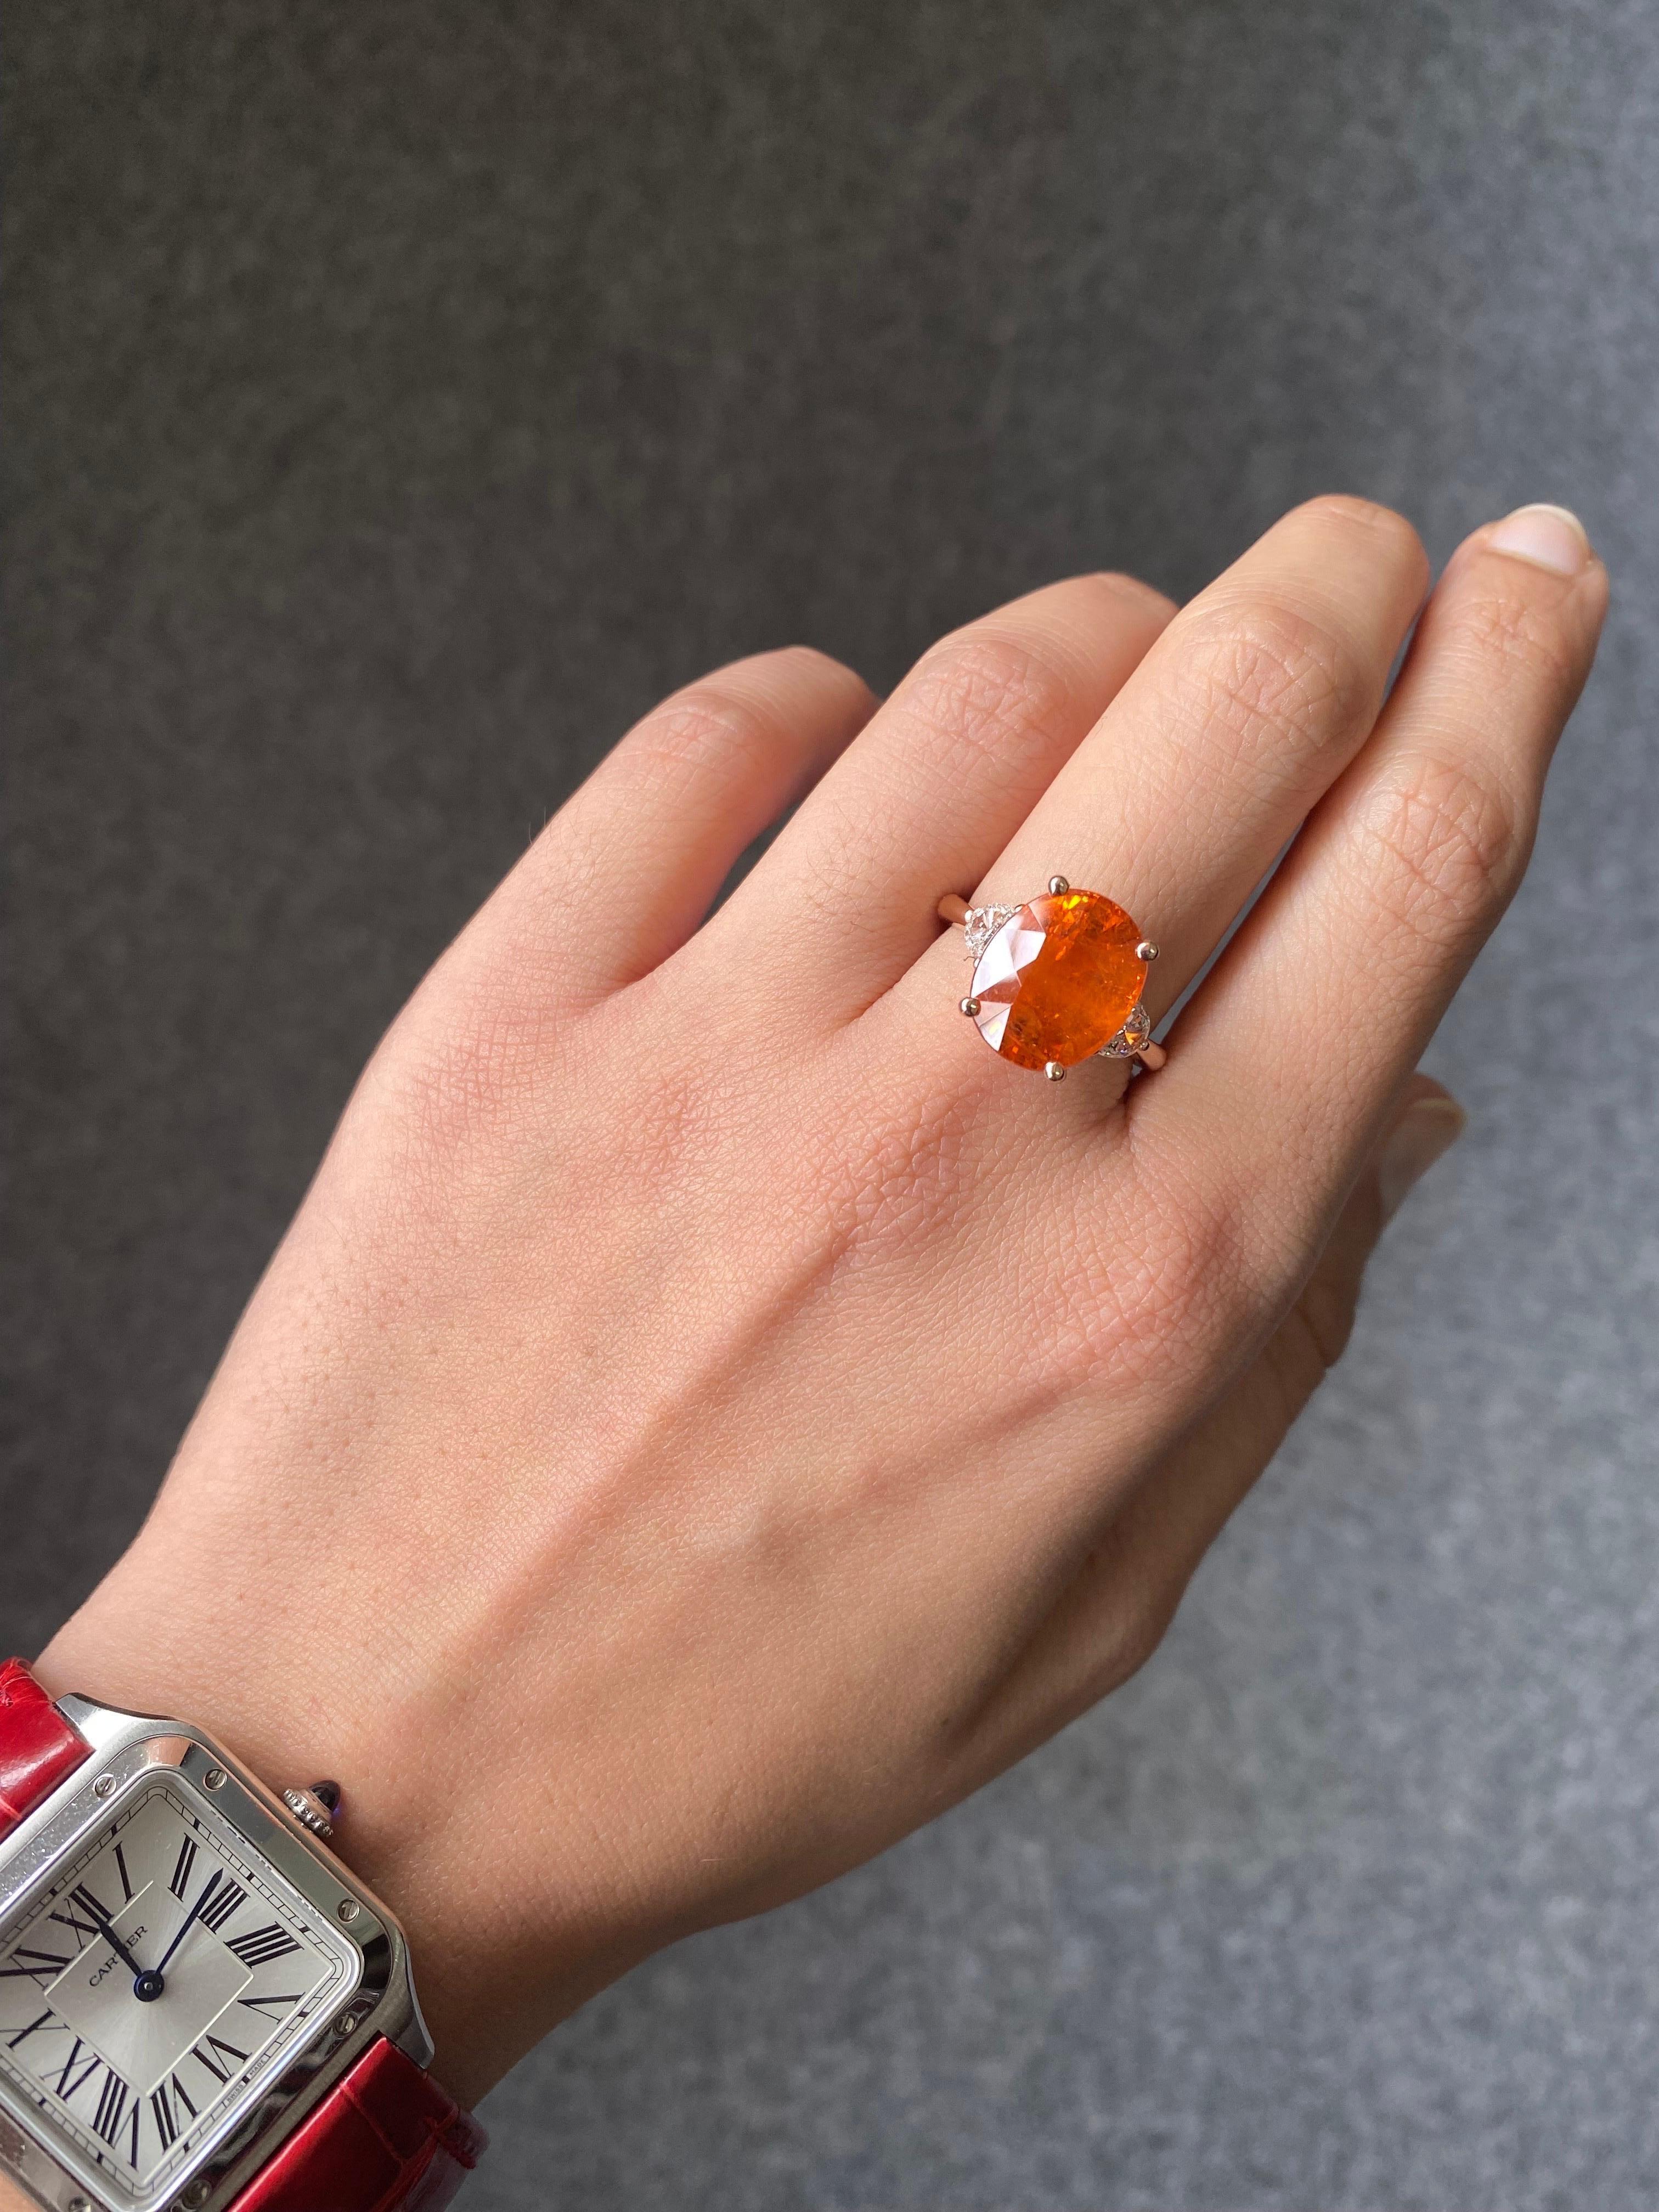 A classic three stone ring, with a 10.21 carat top oval cut Mandarin Garnet (Spessartine Garnet) centre stone and 2 half-moon 0.37 carat side stone White Diamonds. The ring is currently sized US 7, but can be resized. We provide free shipping, and